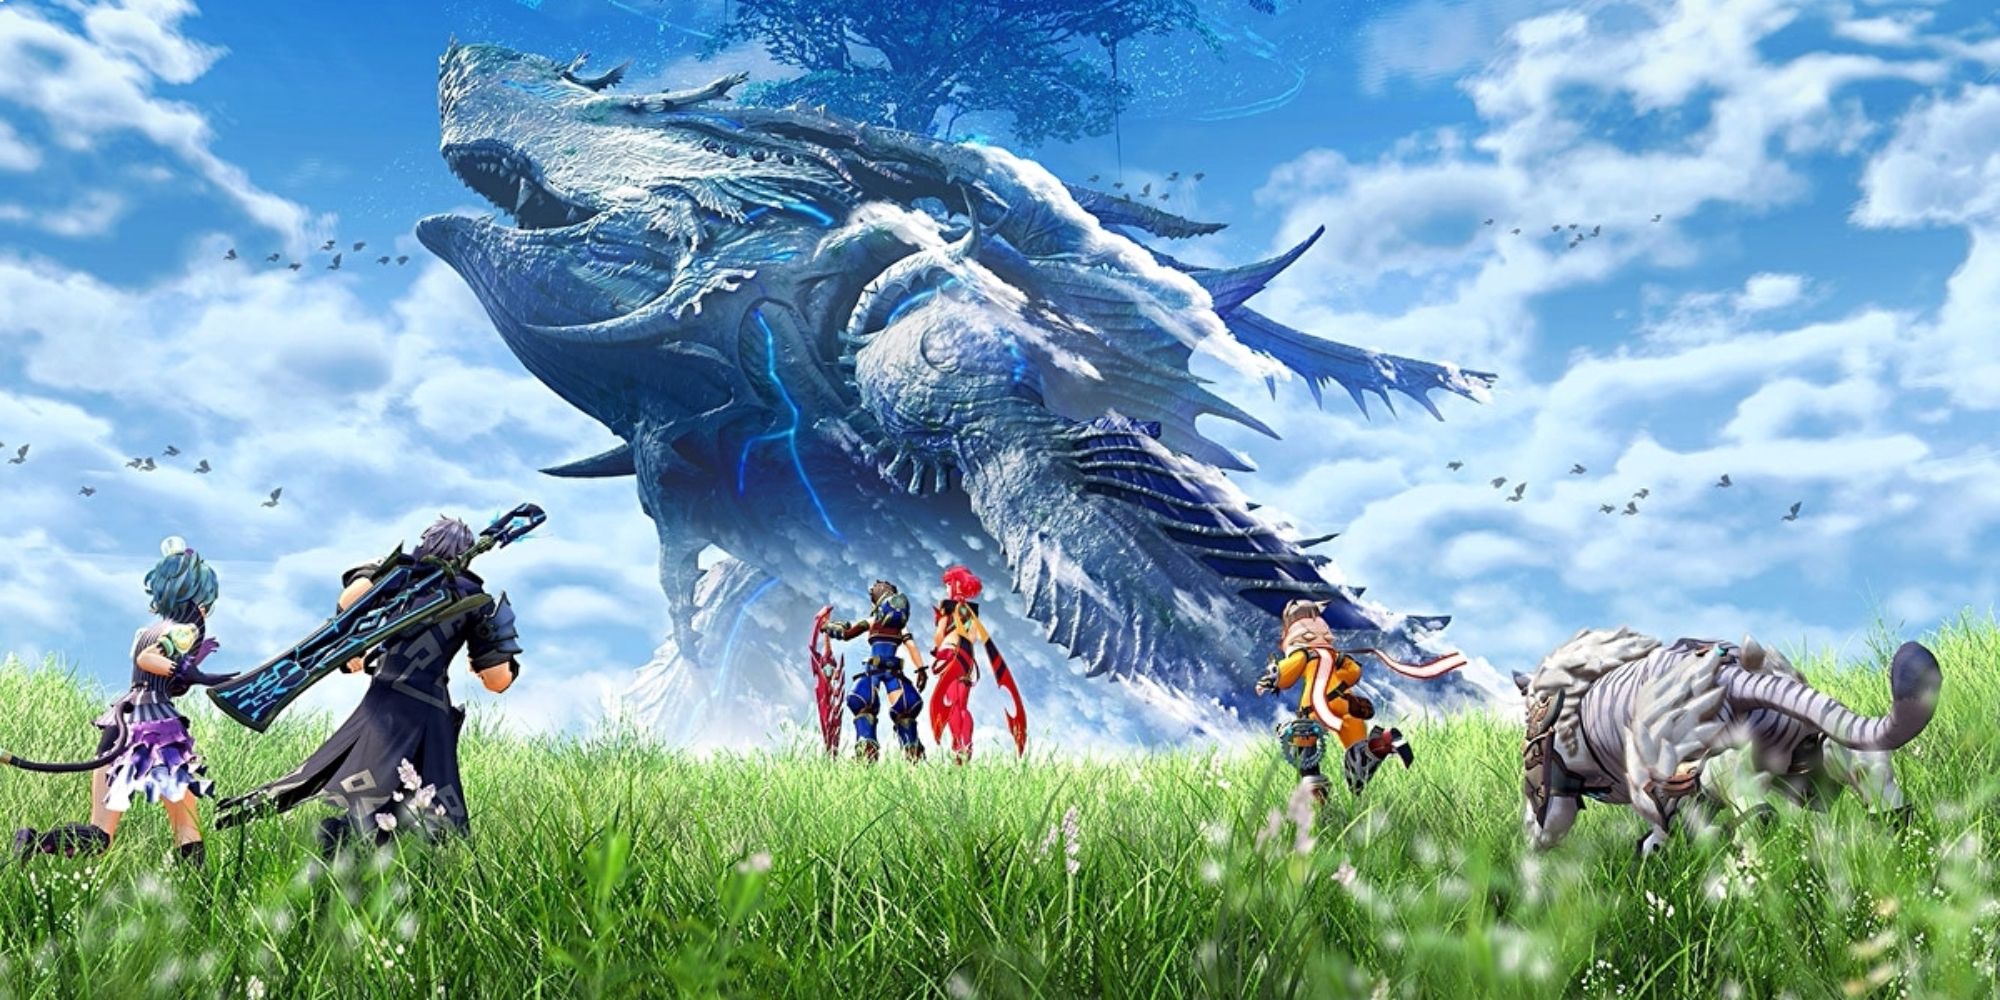 Best fictional planets wide shot of Xenoblade Chronicles 2's Rex, Pyra, Zeke, Pandoria, Nia and Dromarch running across a grassy field towards a hovering Titan in Alrest